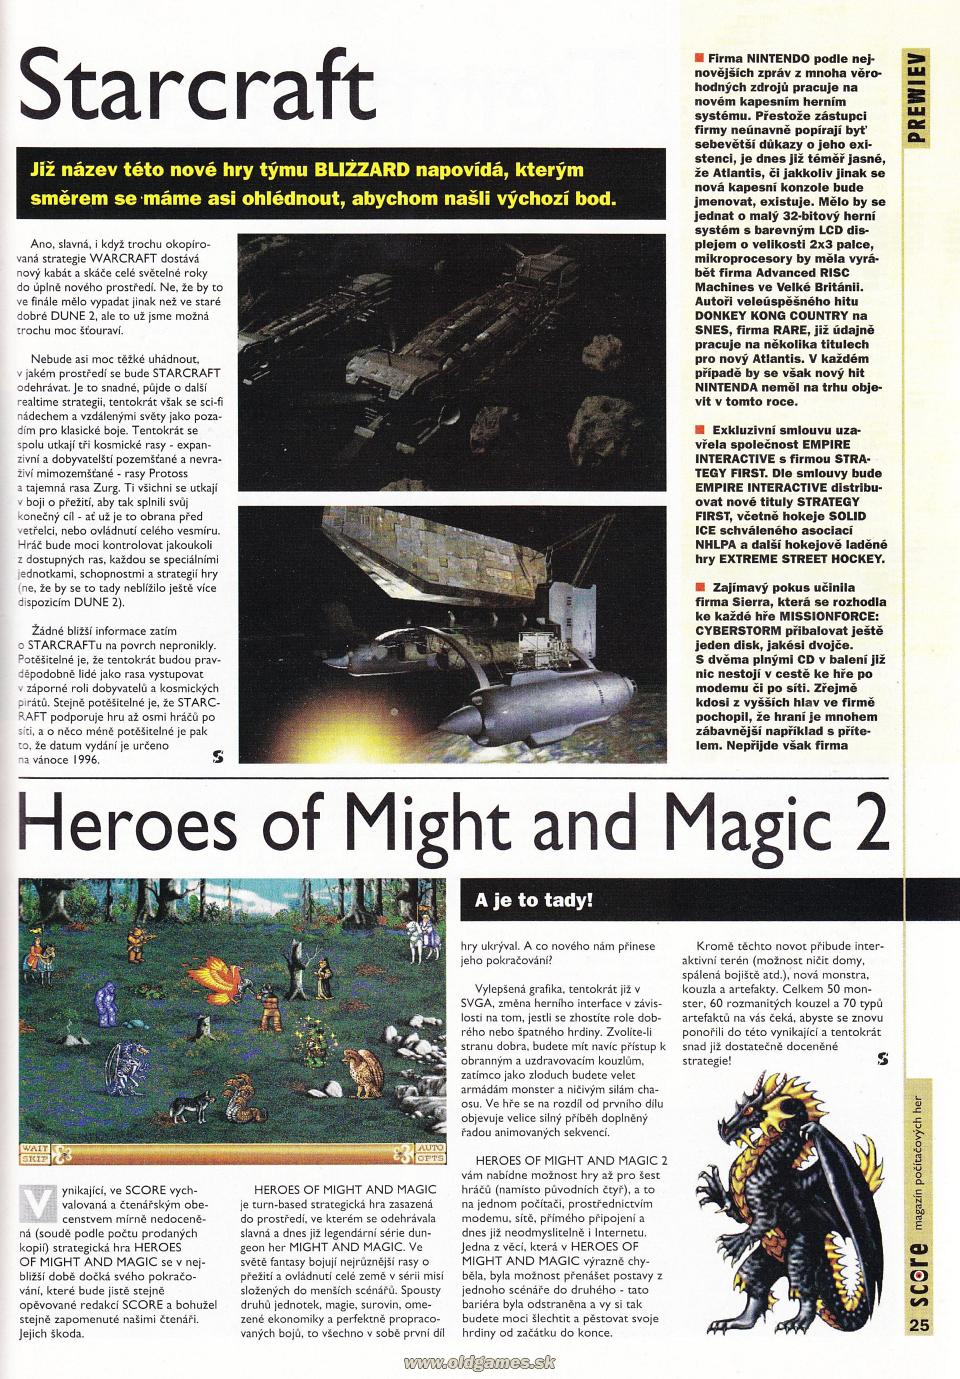 Preview: Starcraft, Heroes of Might and Magic 2